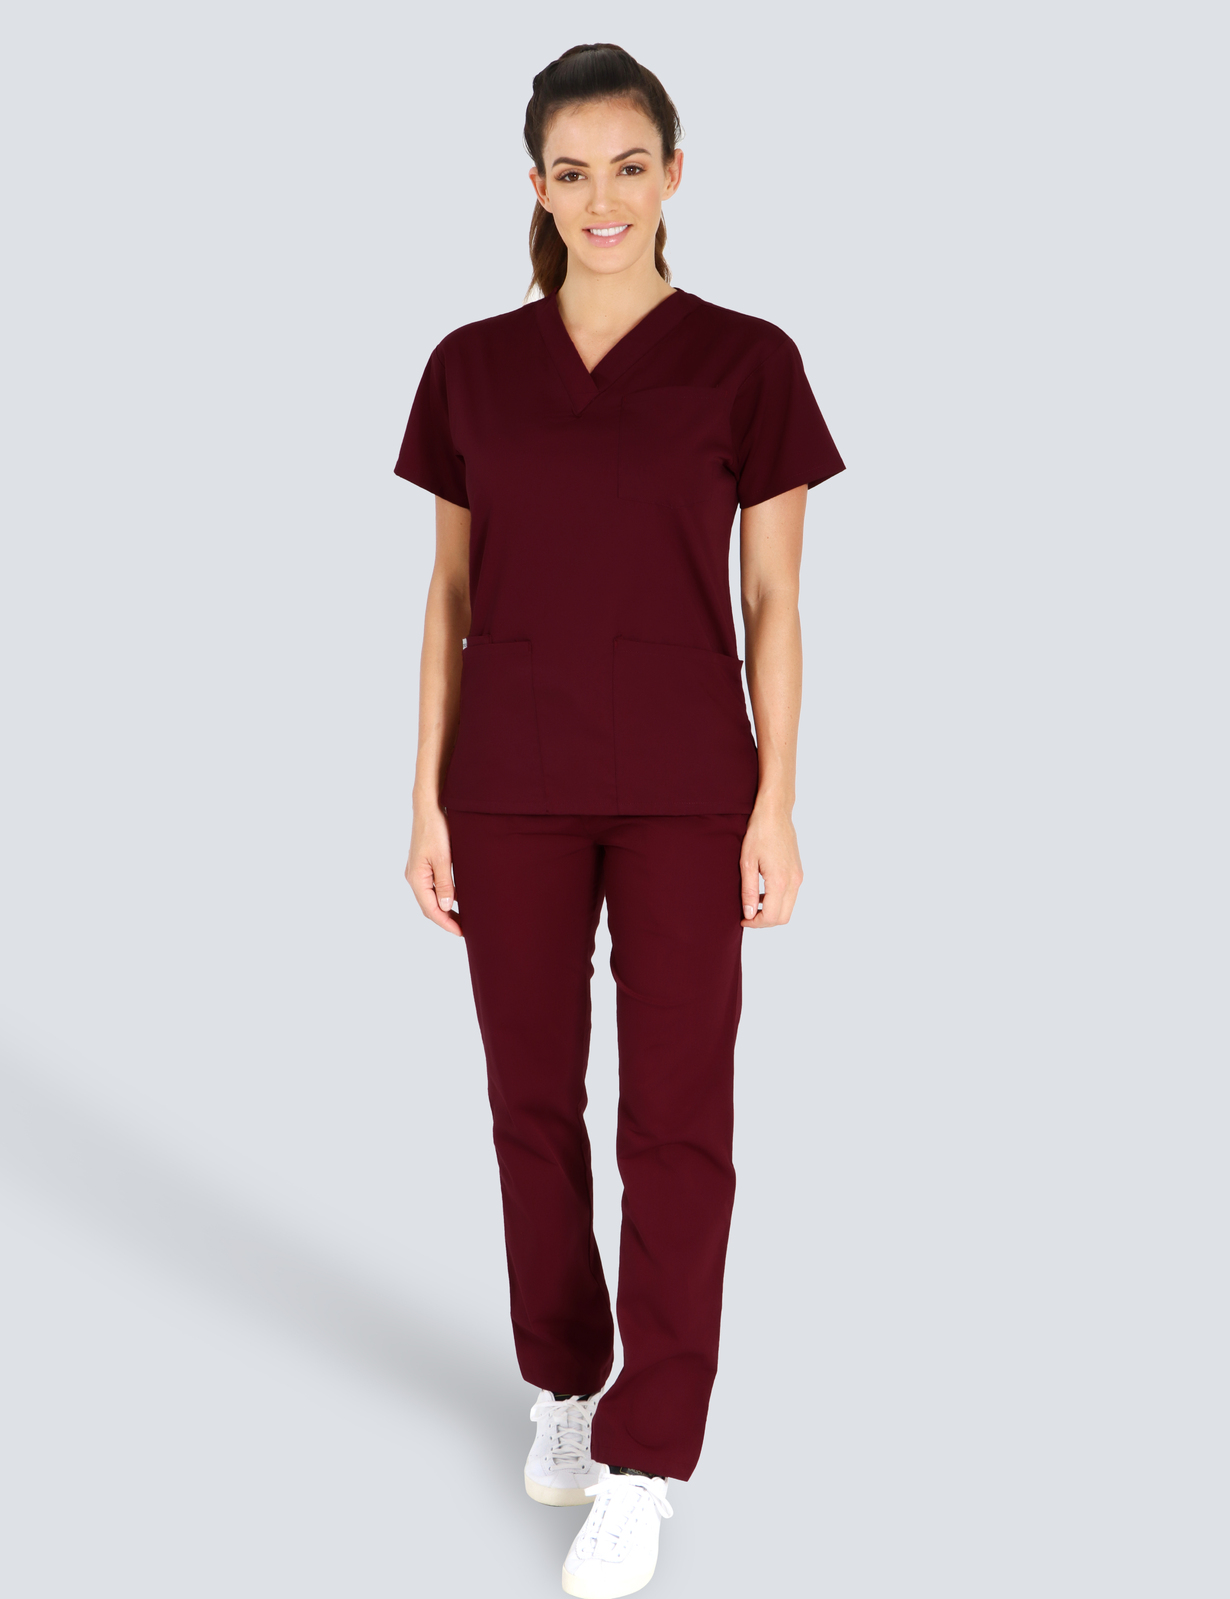 Maleny Hospital - Nursing Practitioner (4 Pocket Scrub Top and Cargo Pants in Burgundy incl Logos)